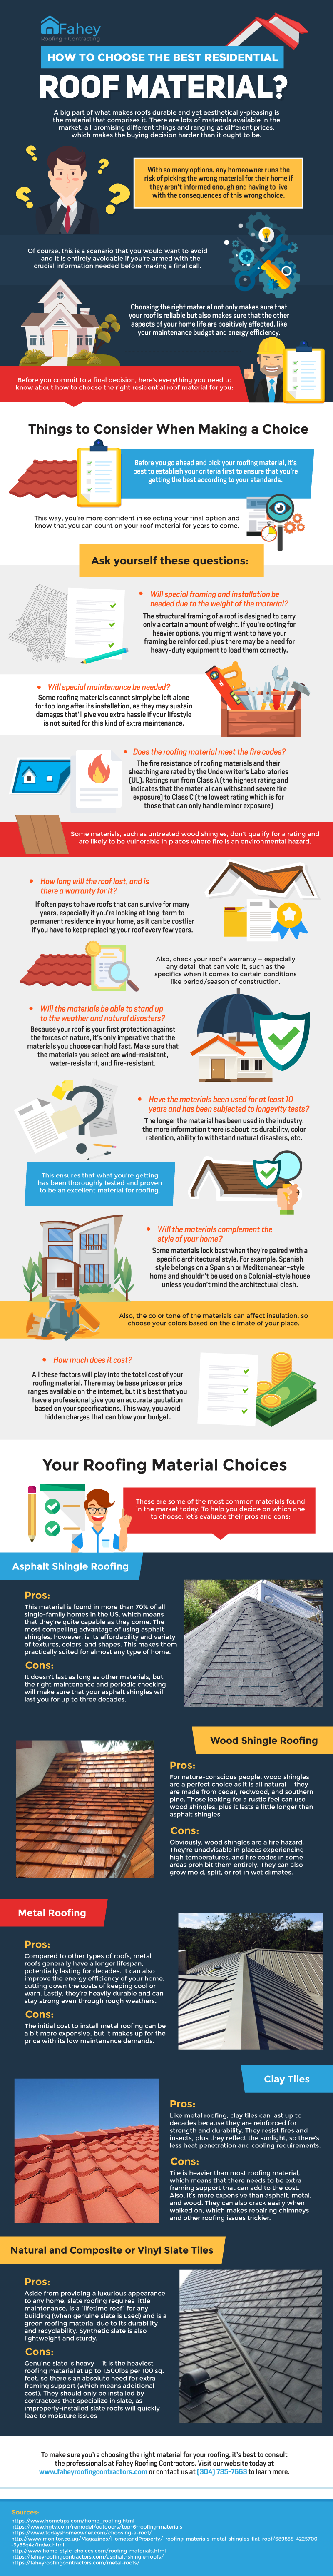 How To Choose The Best Residential Roof Material? (Infographic) | My ...